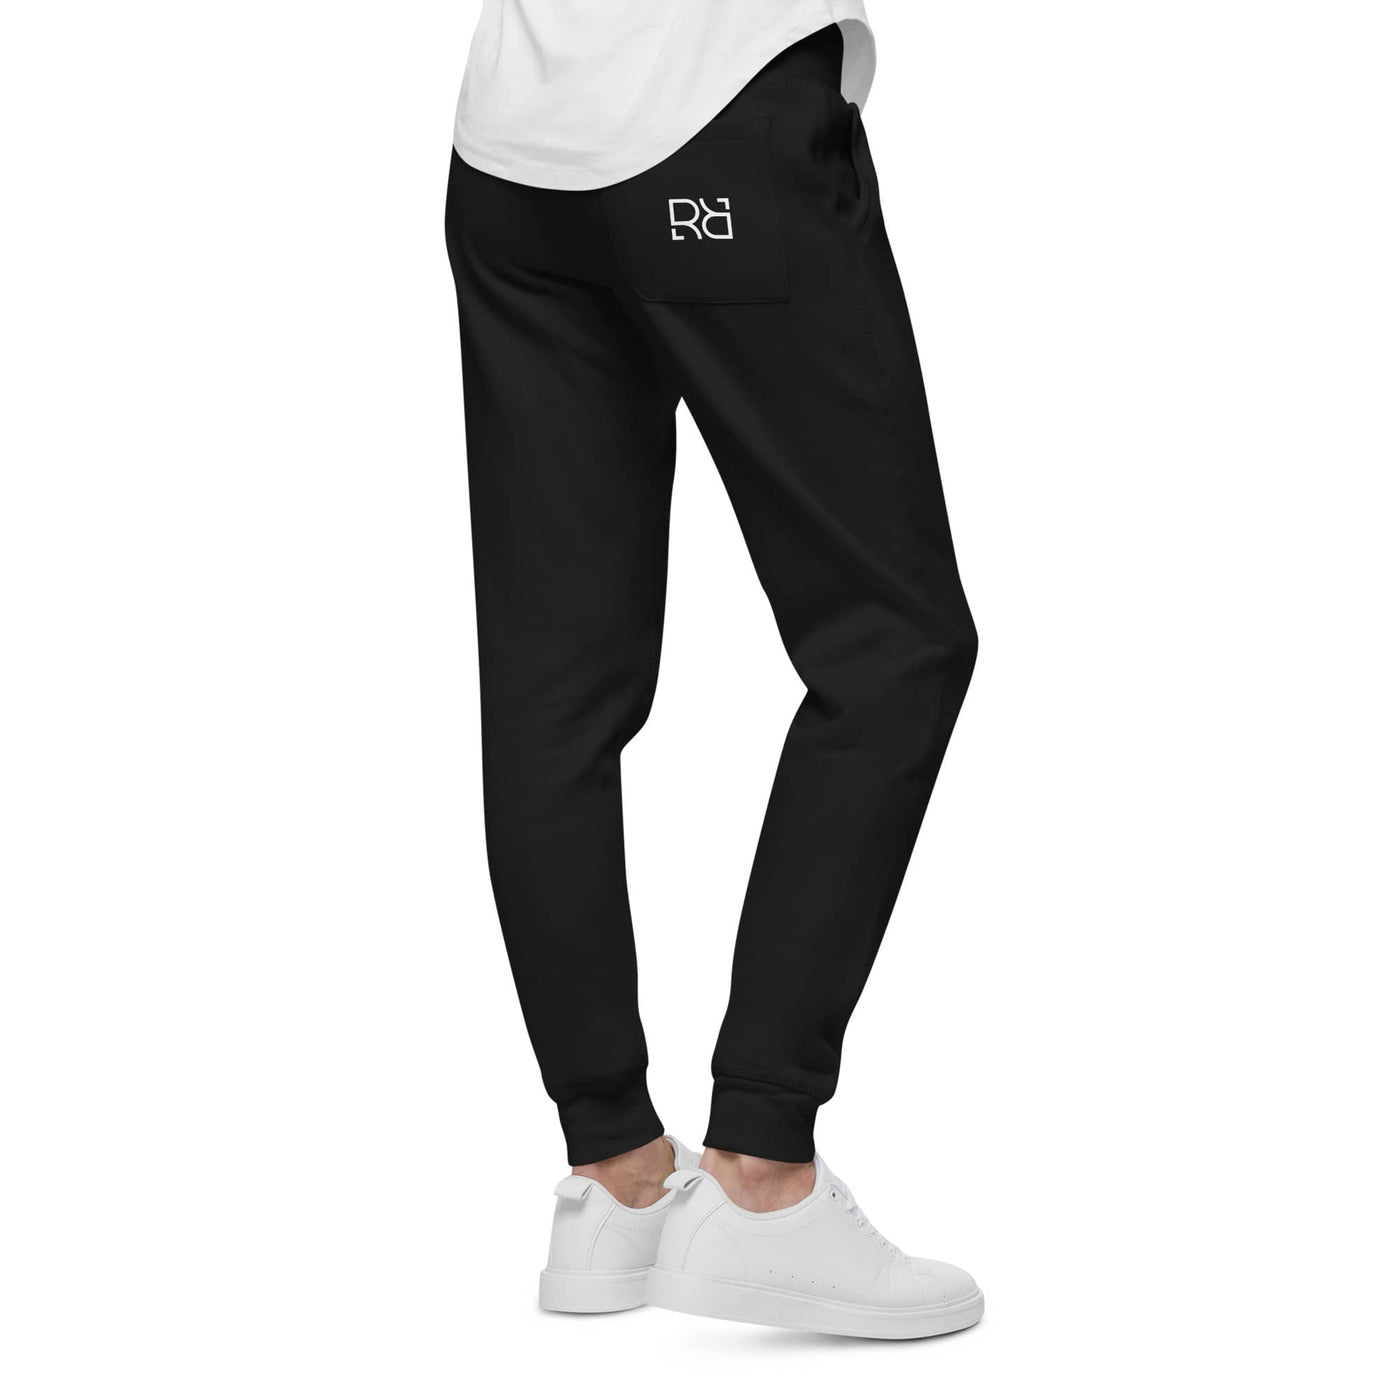 Woman wearing Black Built Different leg design joggers with pockets